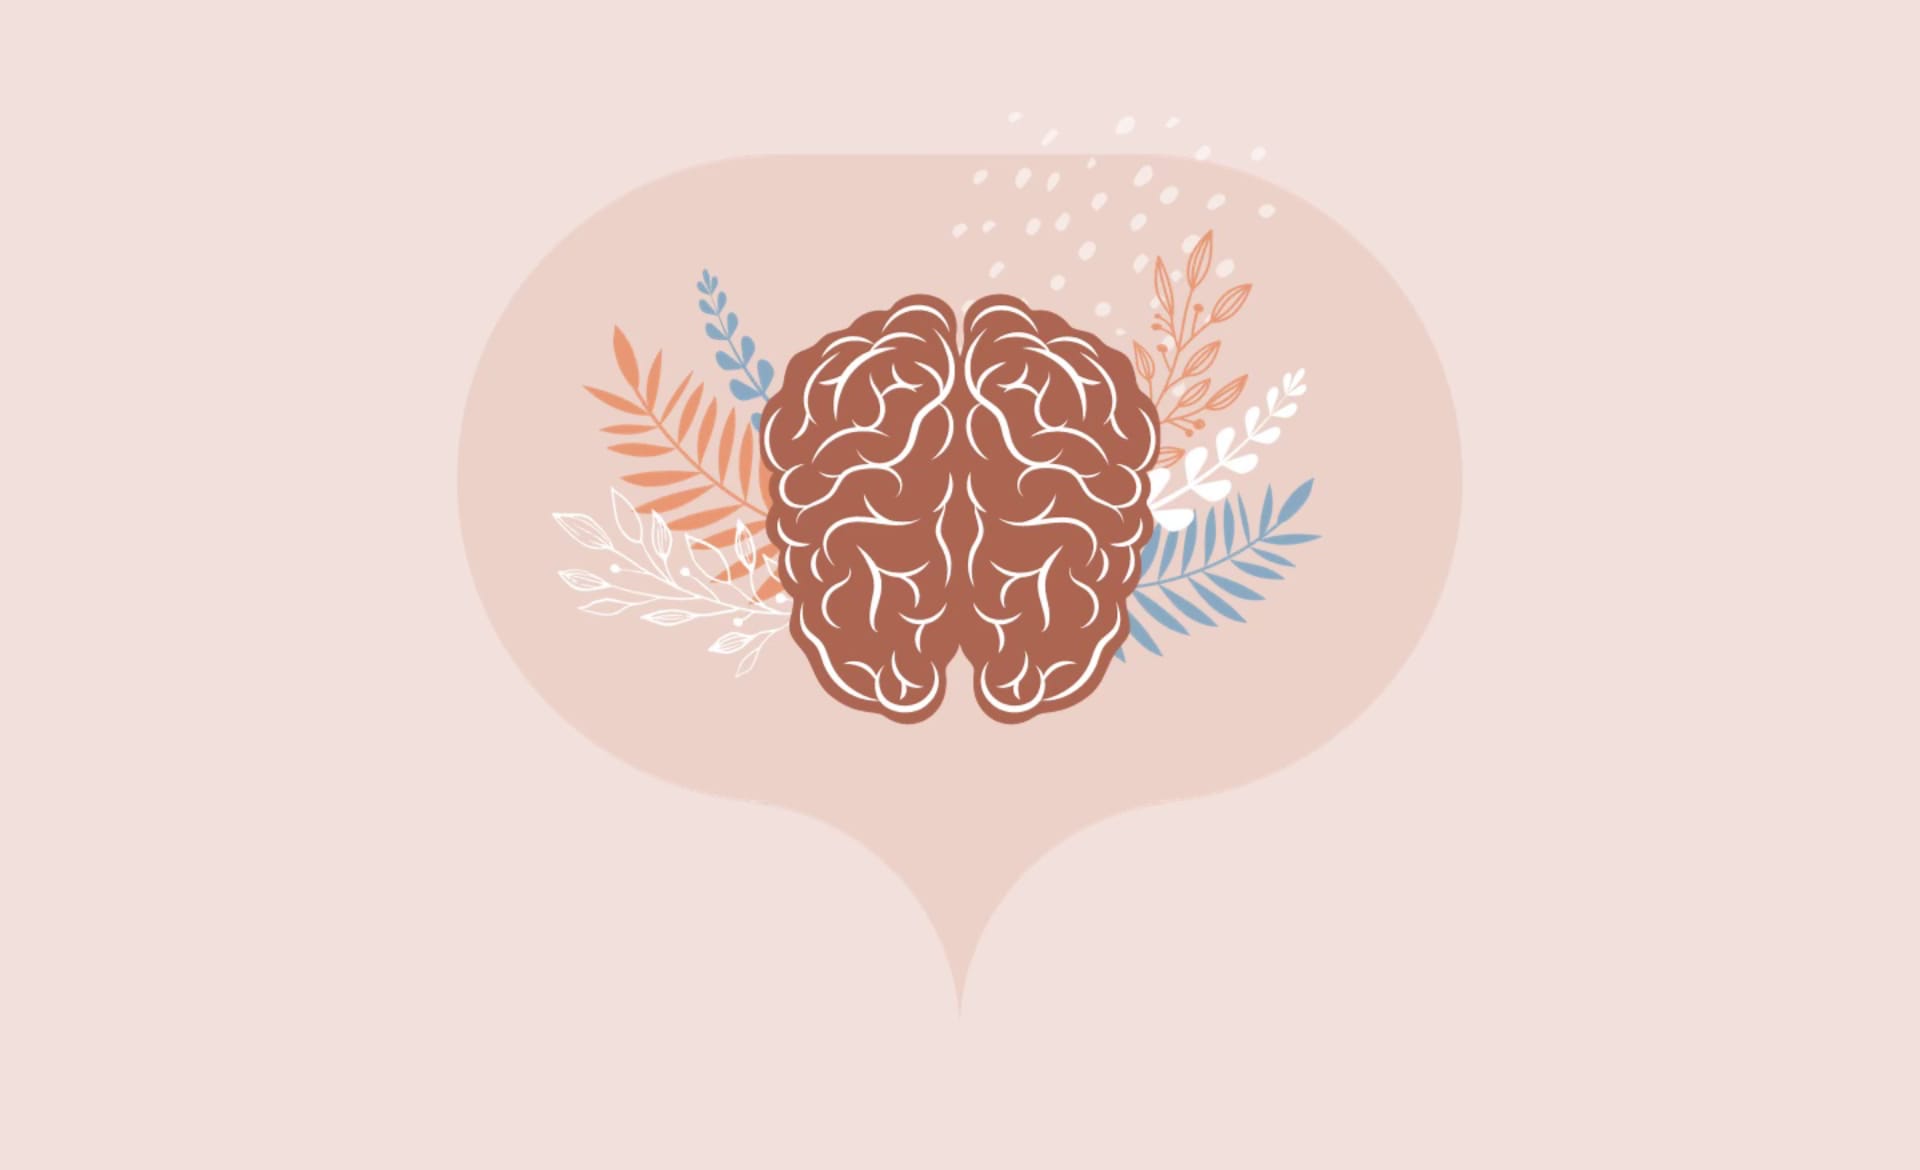 An illustration of a brain in a speech bubble, representing the Unlocking the Secrets to Brain Health and Longevity.